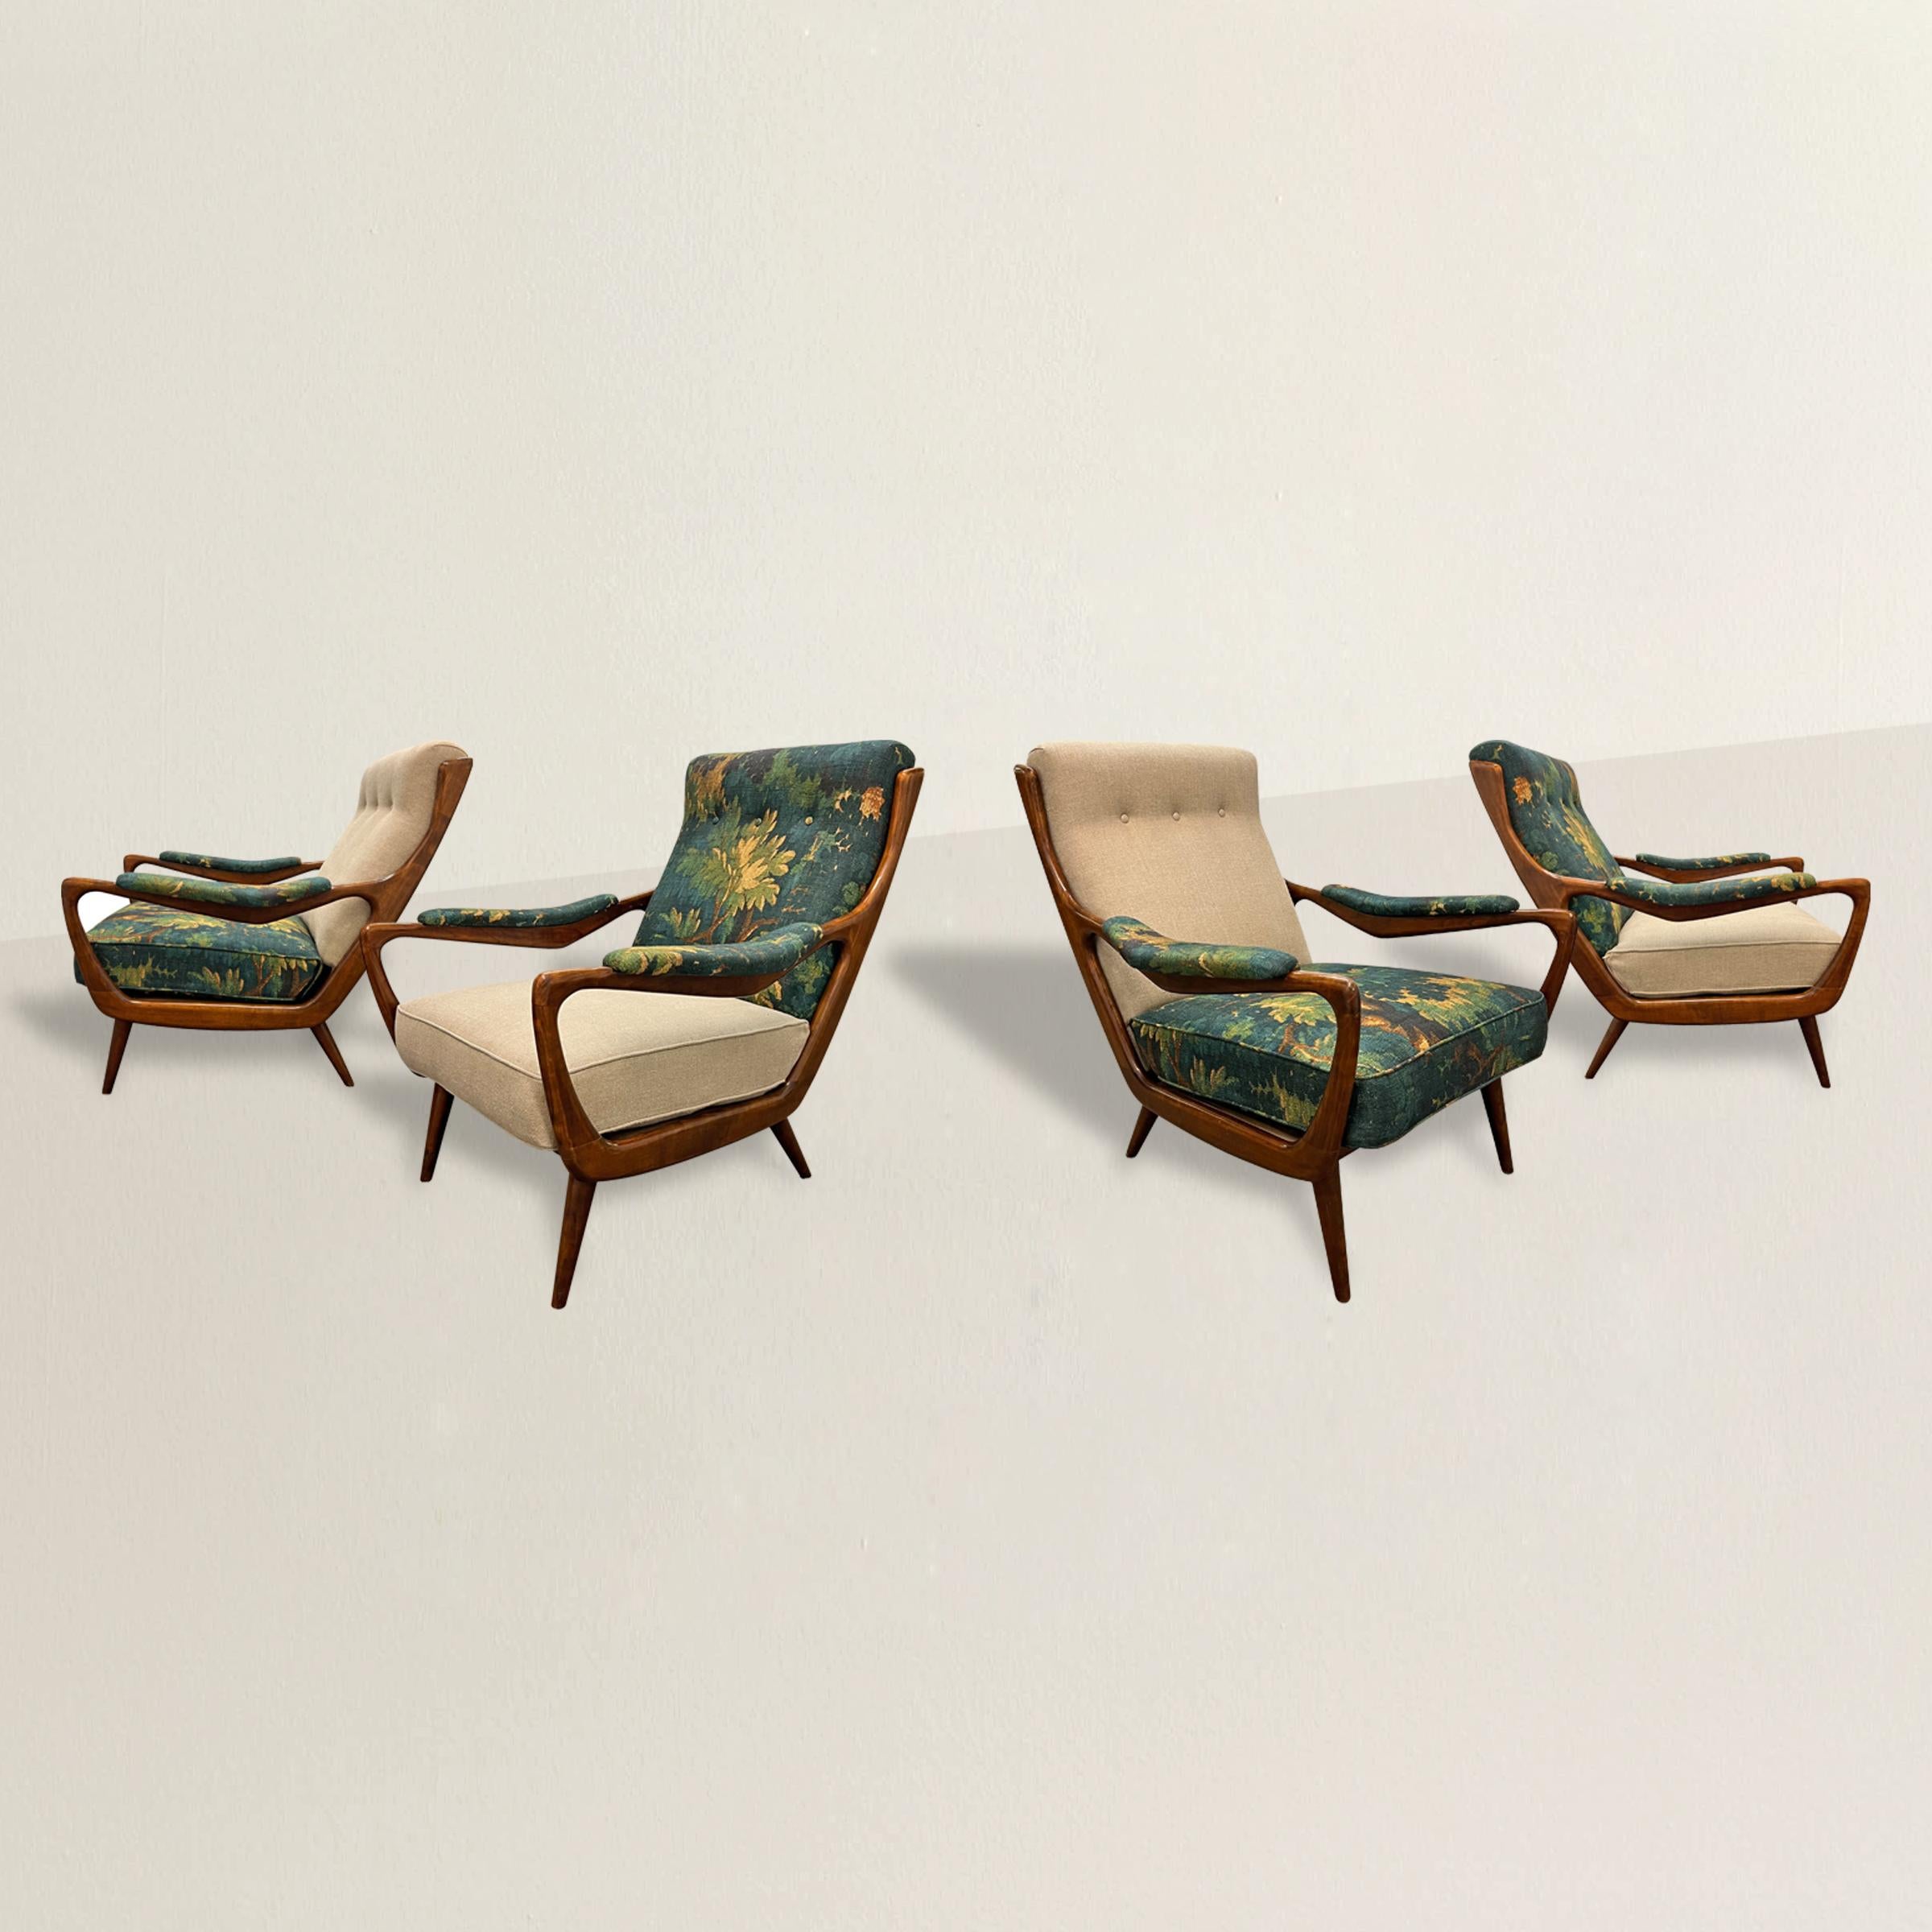 Elevate your interior with this set of four 1950s Danish Modern lounge chairs, a harmonious blend of mid-century elegance and contemporary style. The chic wood frames, emblematic of Danish Modern design, exemplify the movement's emphasis on natural